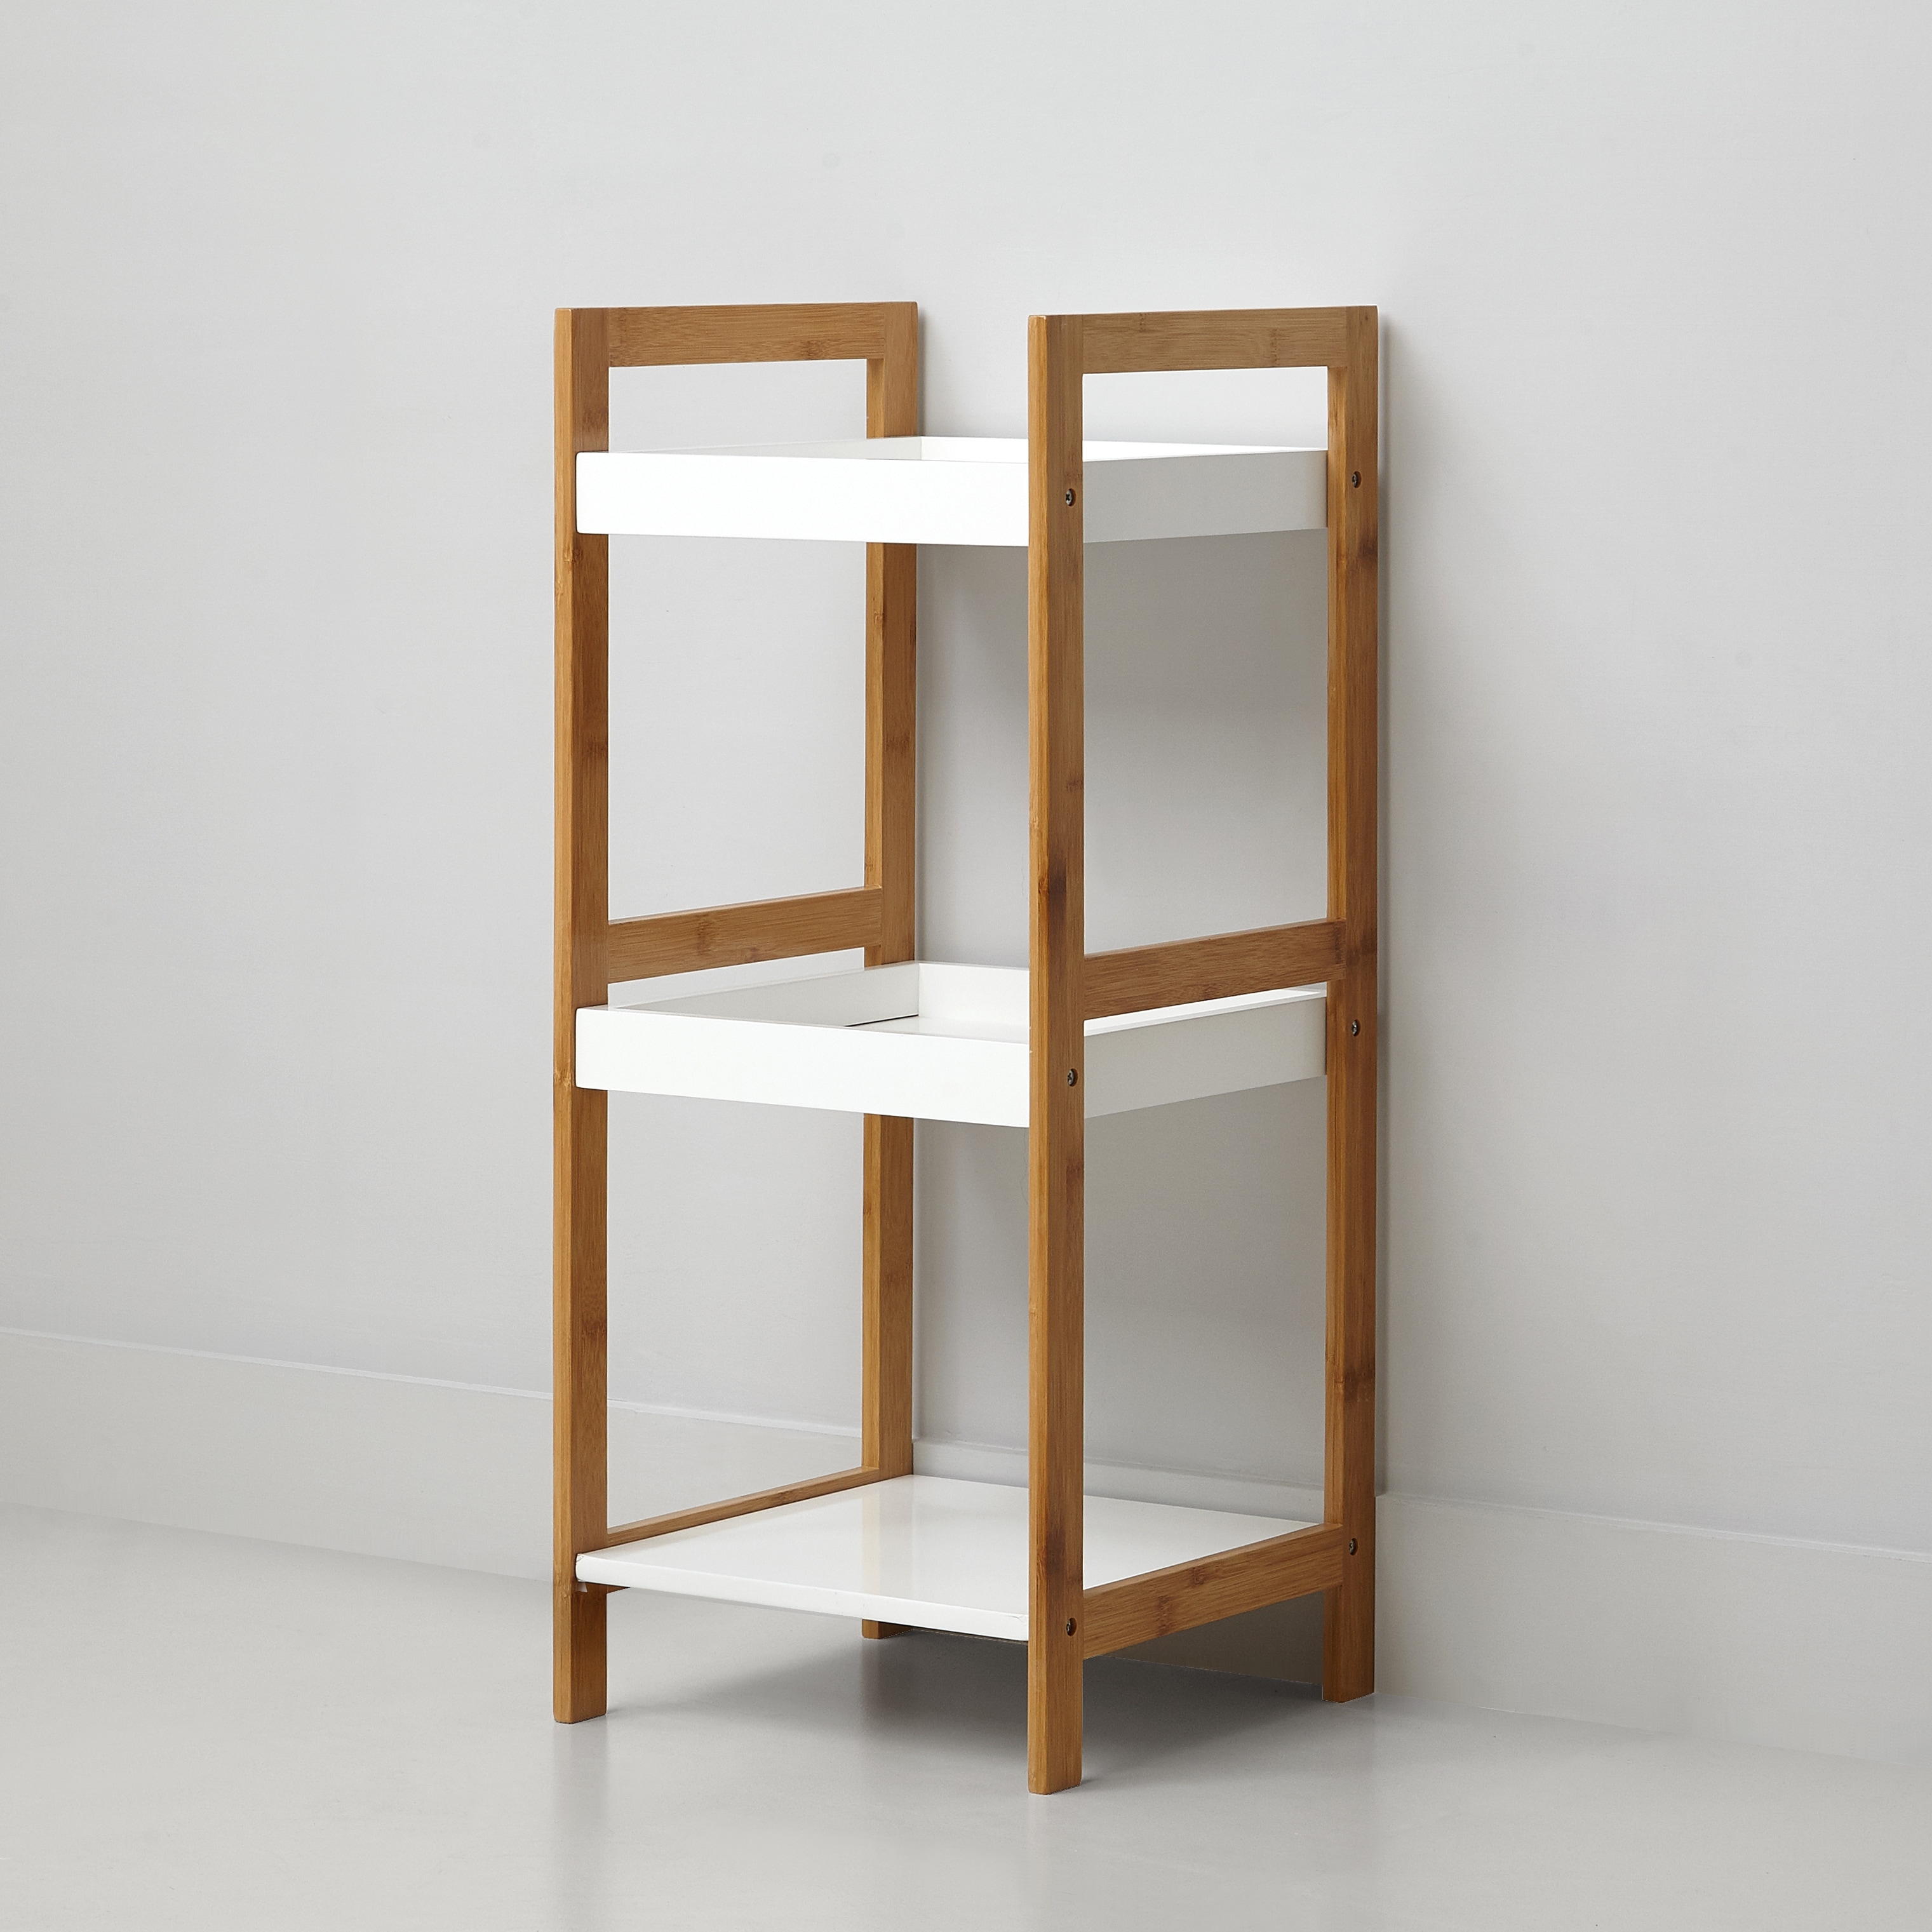 https://ak1.ostkcdn.com/images/products/is/images/direct/55c901fa5c993063d014cb63ea006d9bde20bde6/Bamboo-Collection-3-Tier-White-Storage-Shelf.jpg